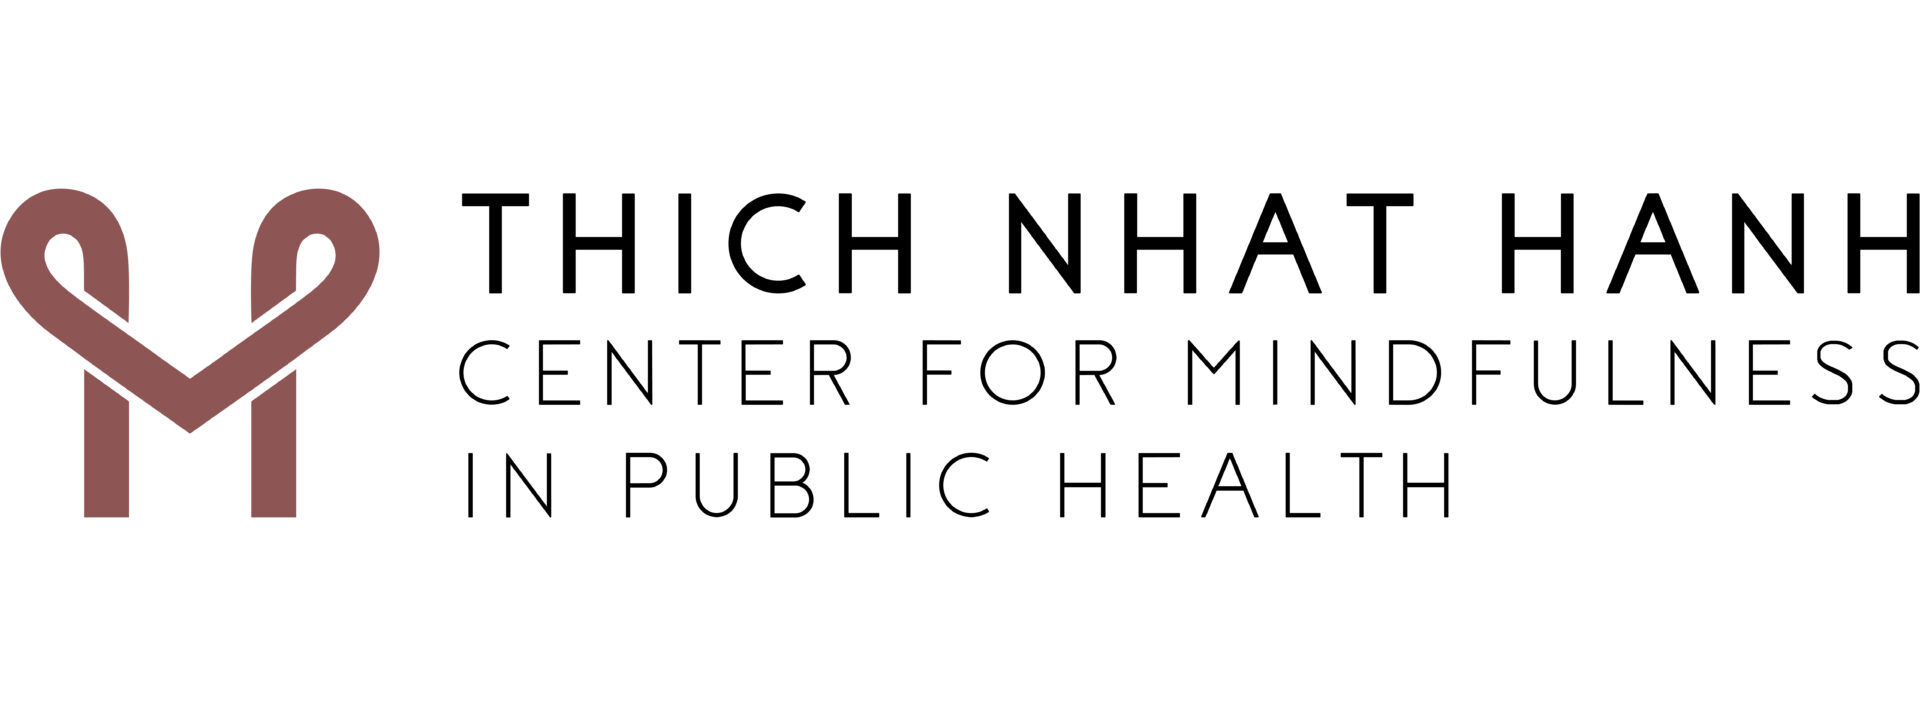 The New Thích Nhất Hạnh Center for Mindfulness in Public Health